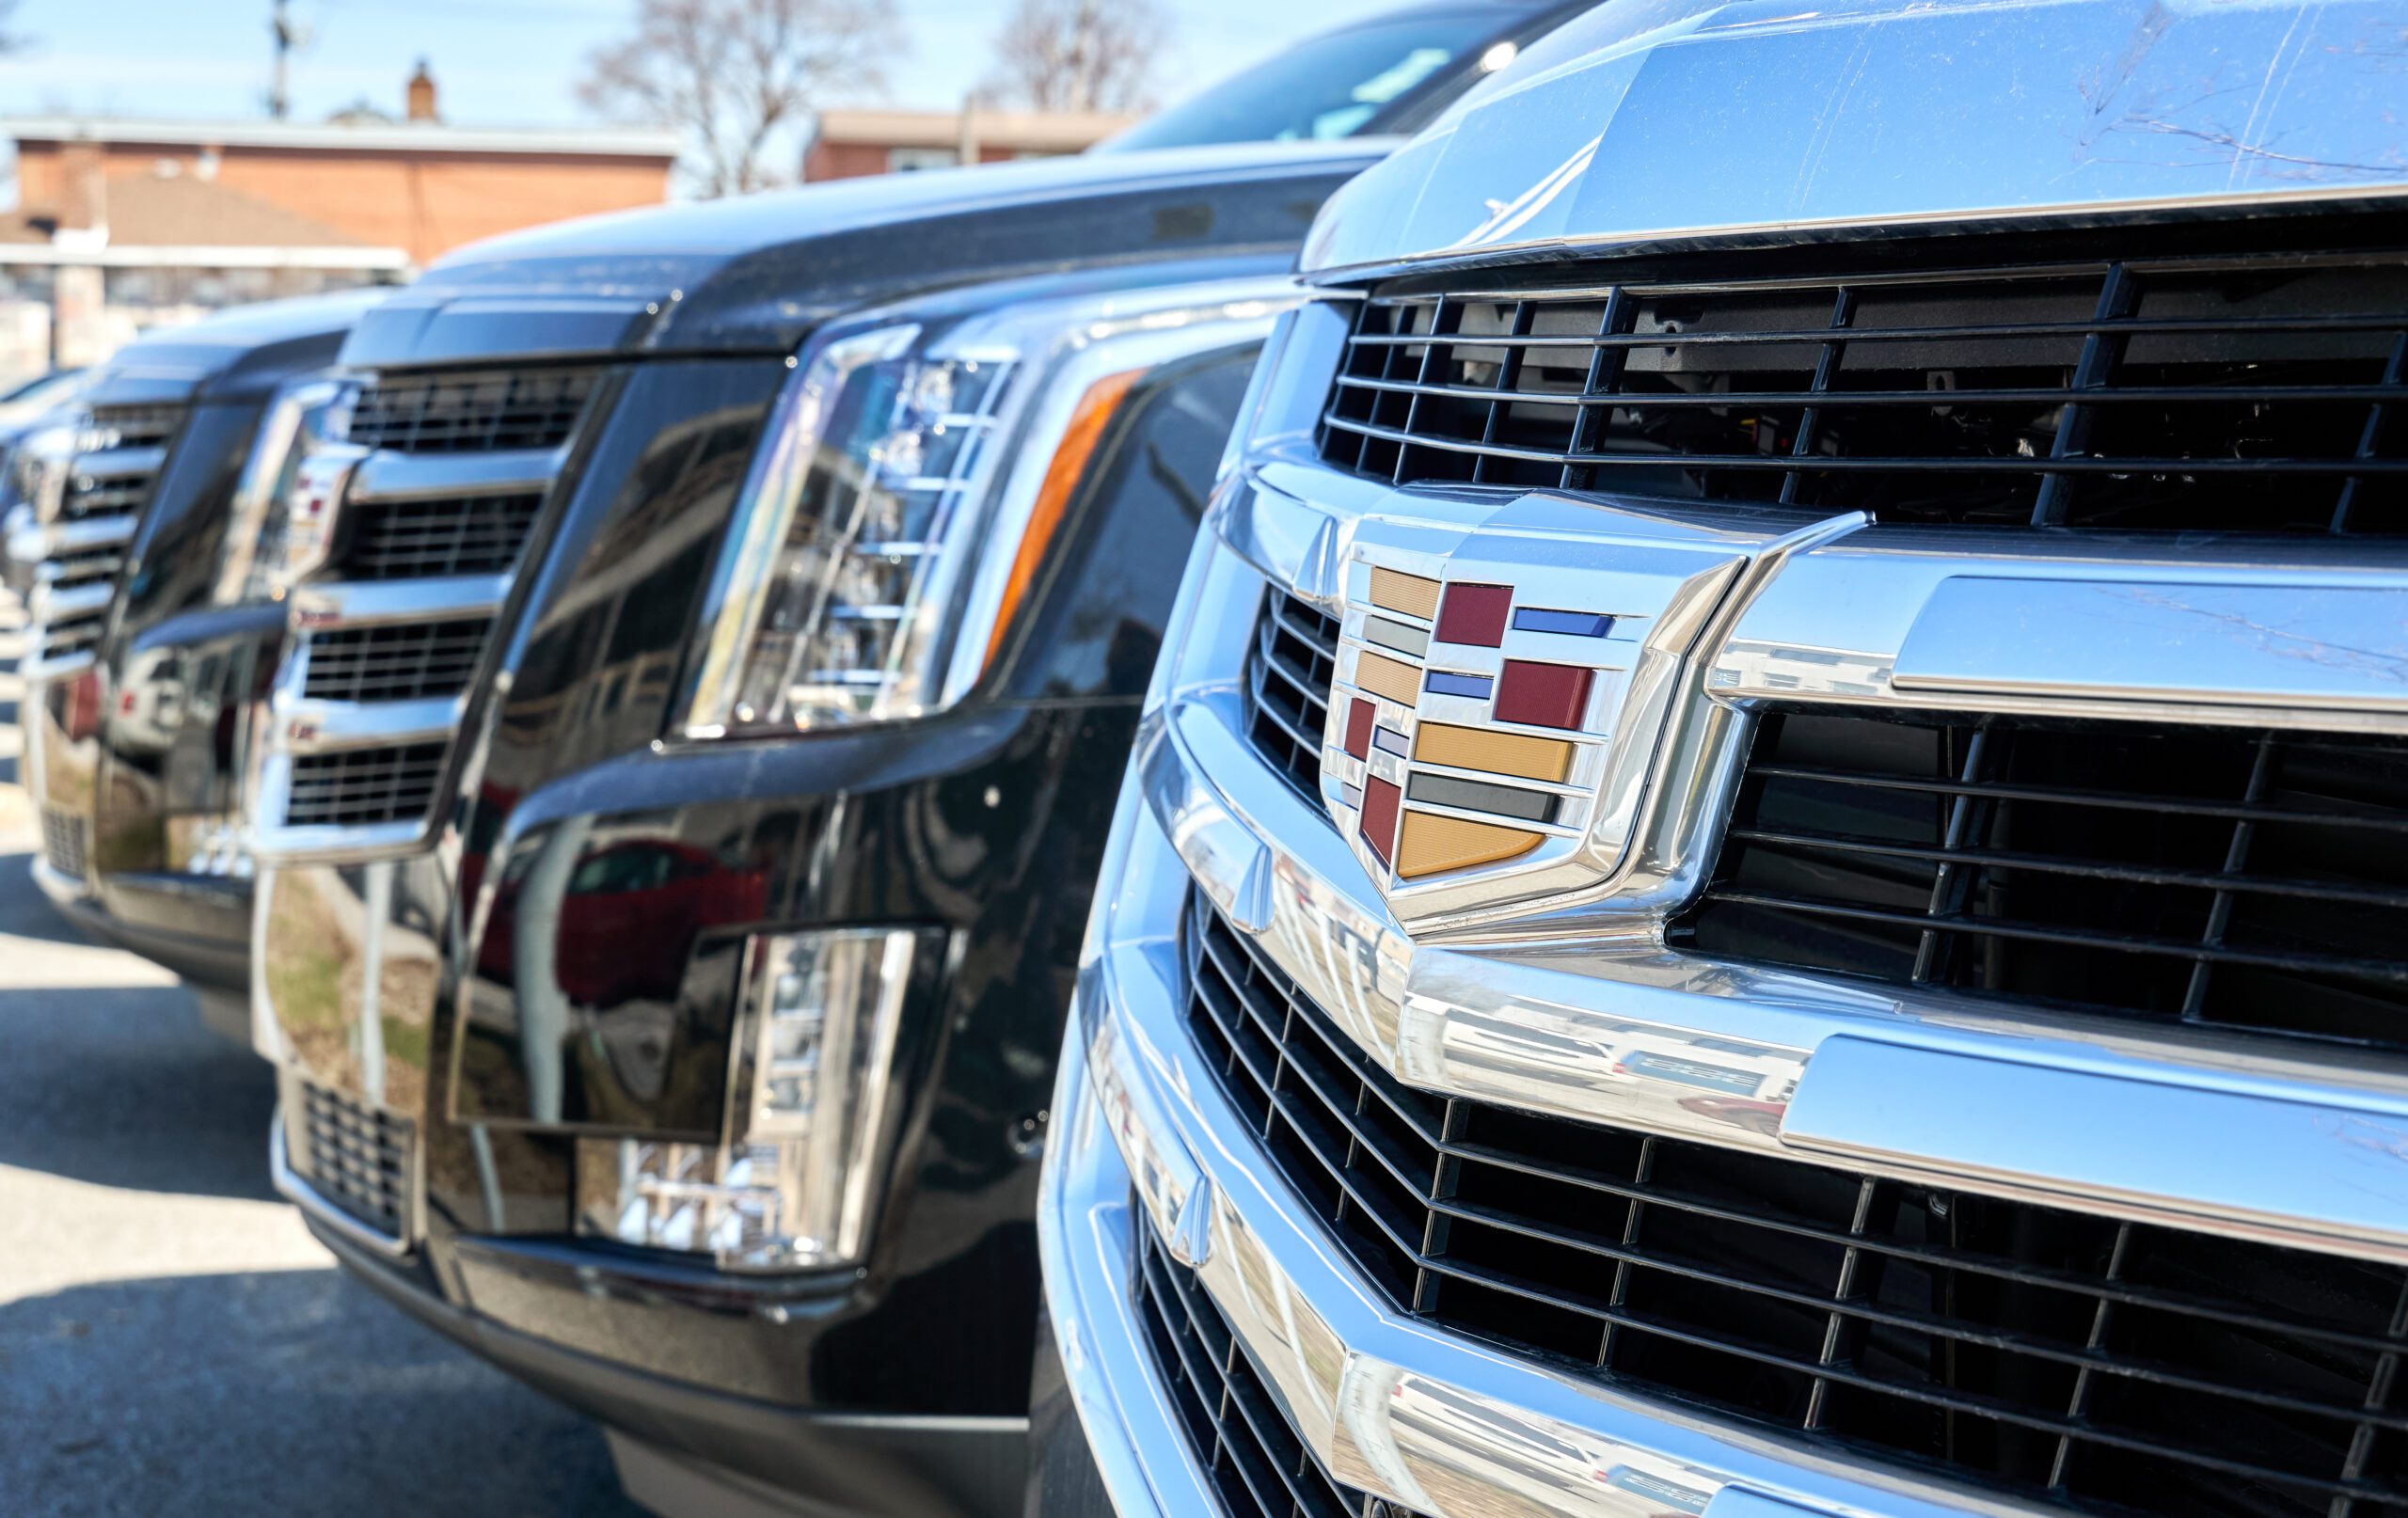 A class action lawsuit alleges defects in infotainment systems of certain Cadillac Escalade vehicles.